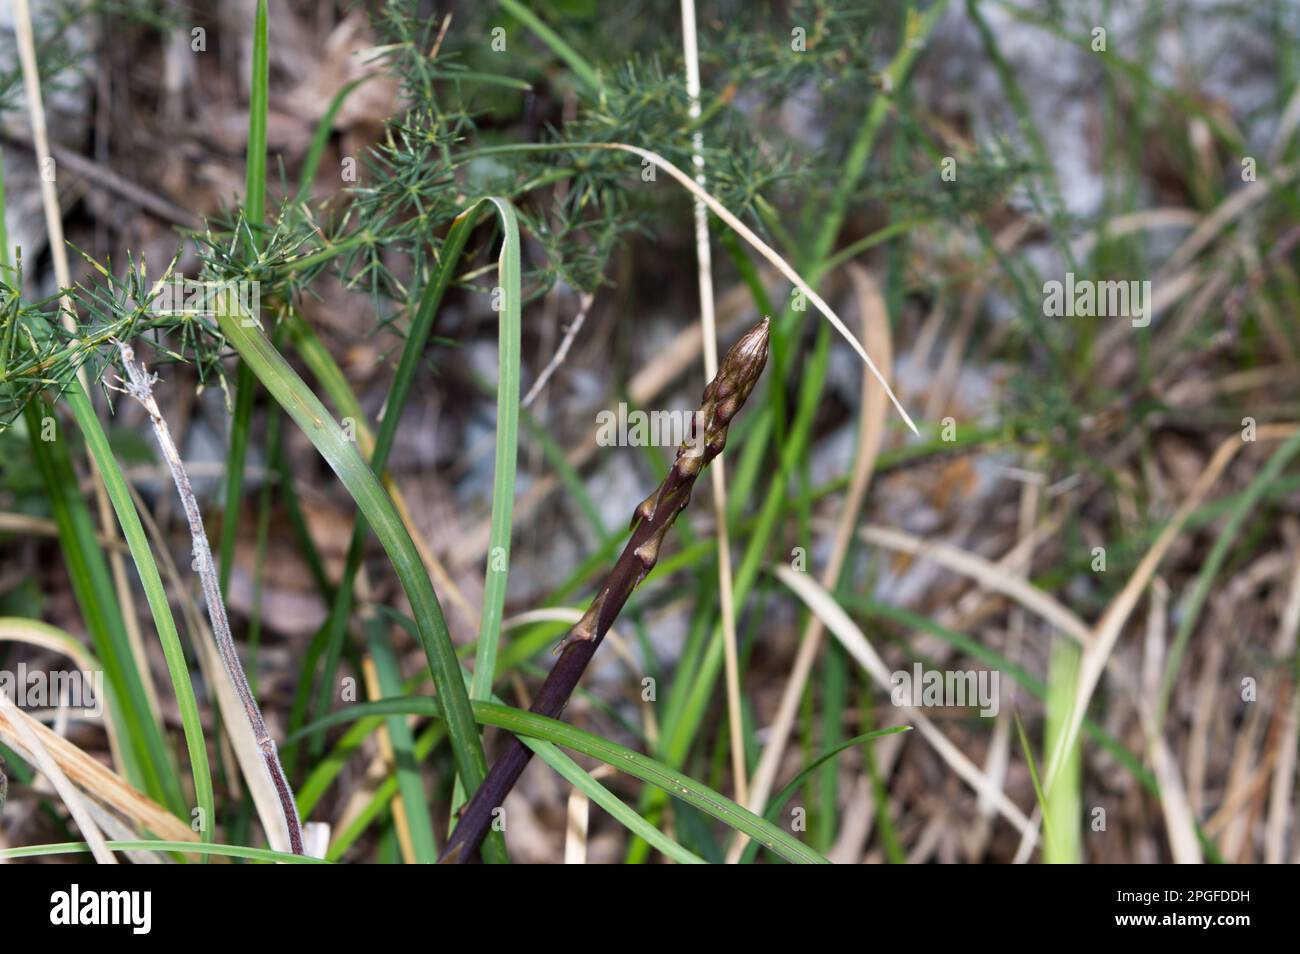 Wild asparagus growing in the forest, picking season during springtime in Dalmatia Stock Photo